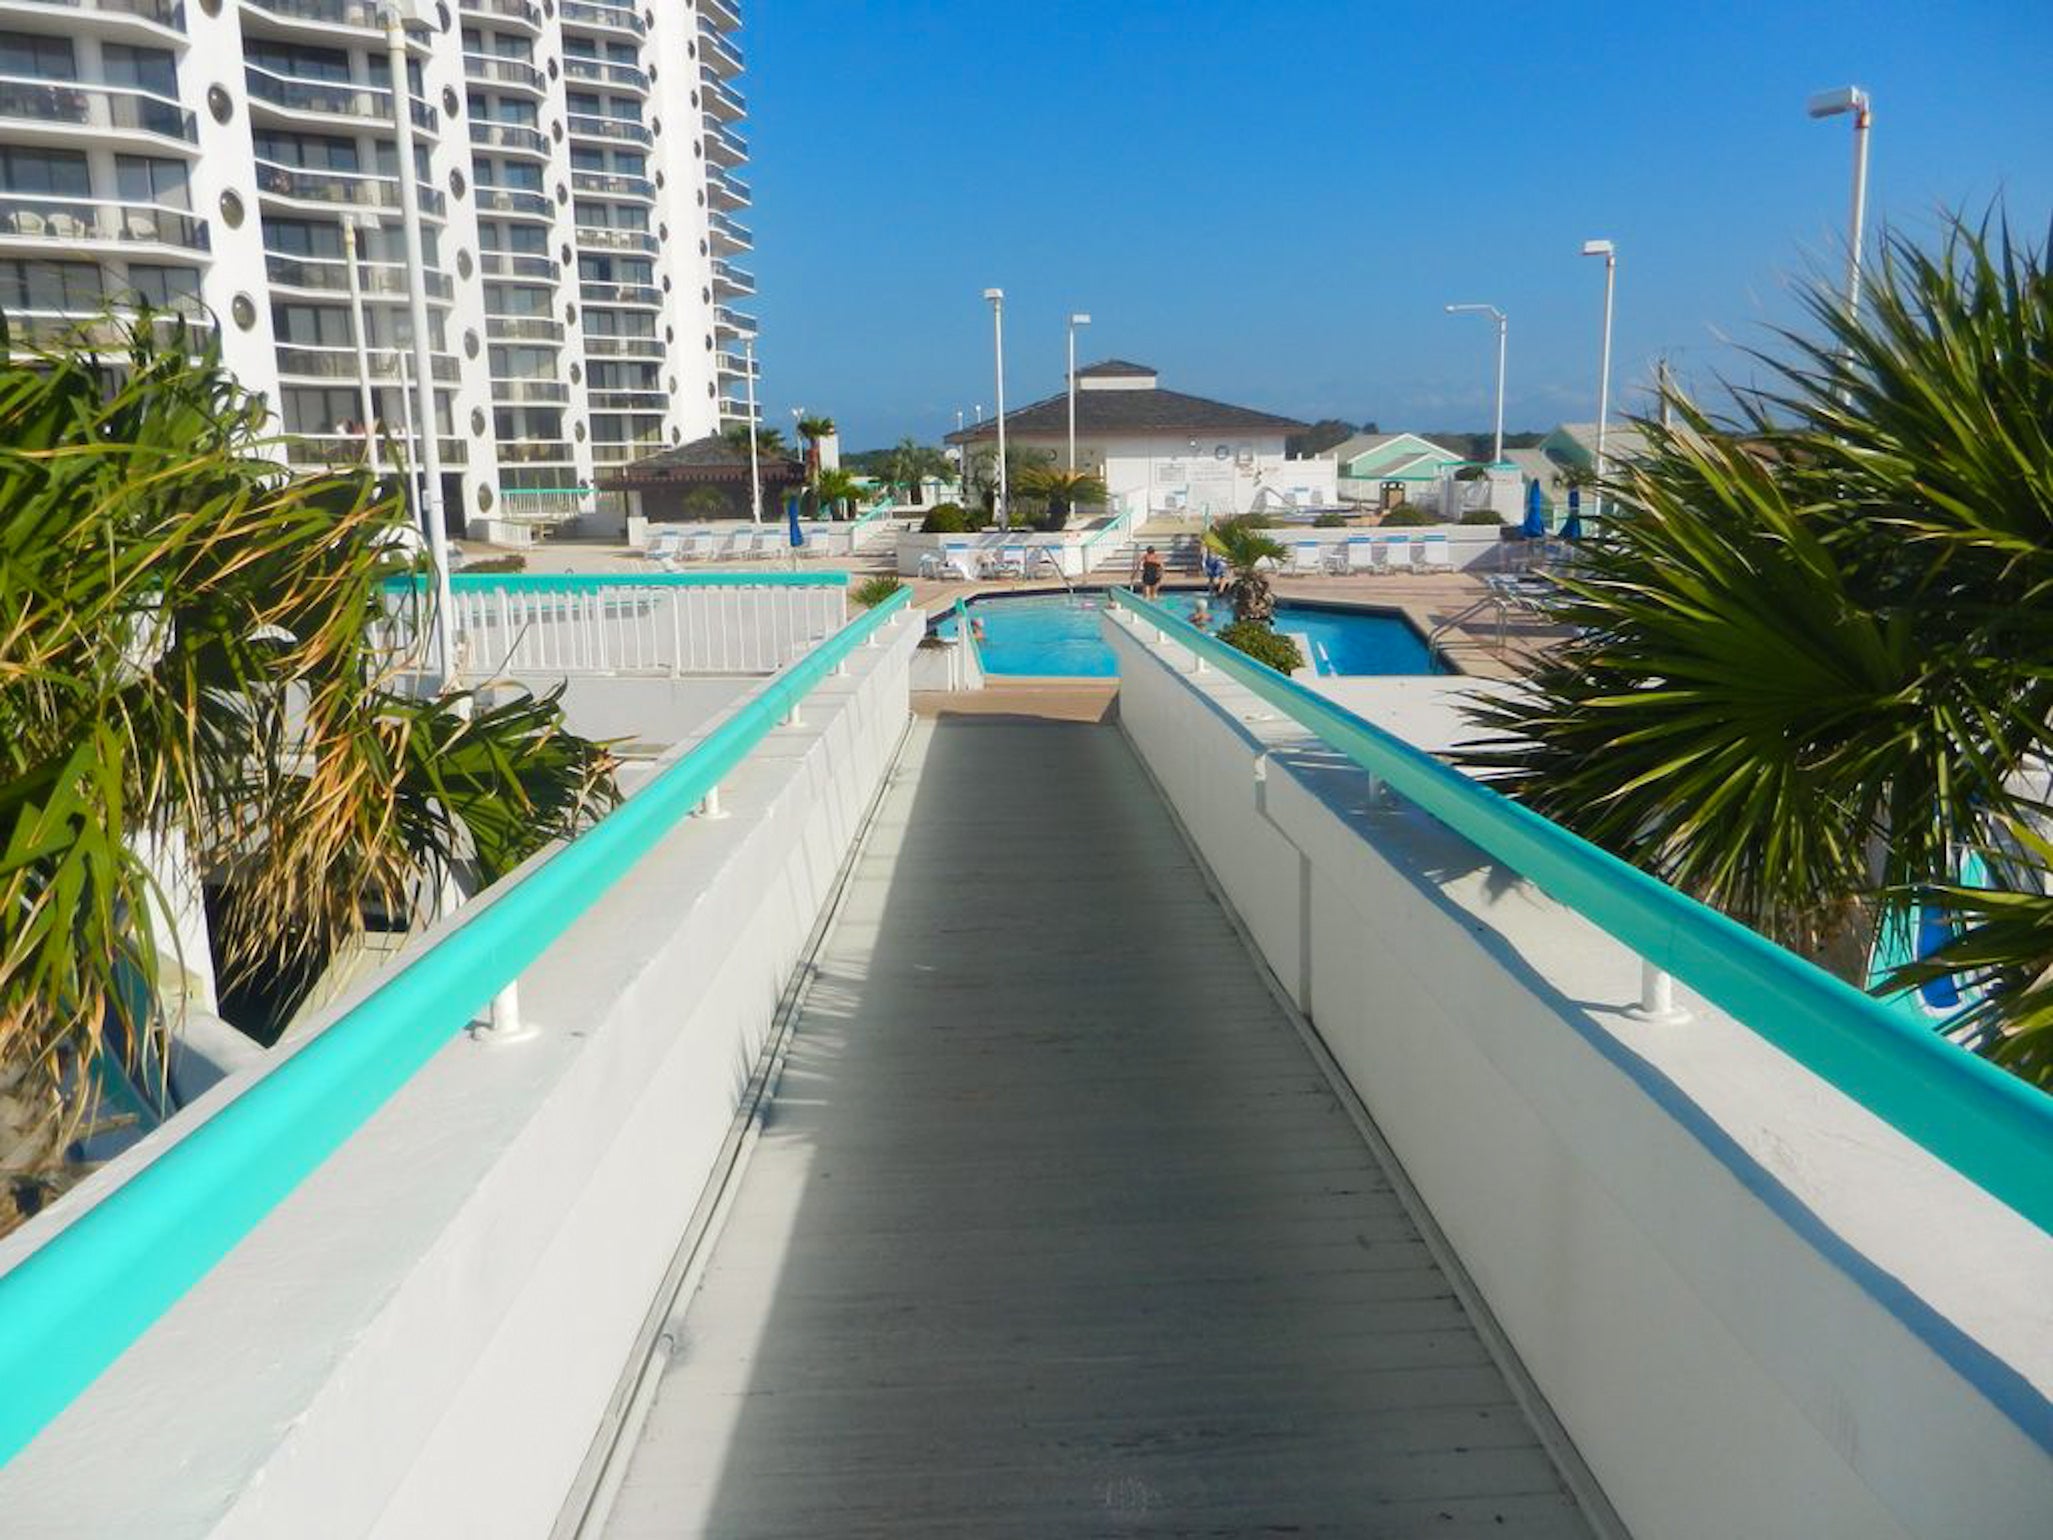 Walkway from the pool to the beach